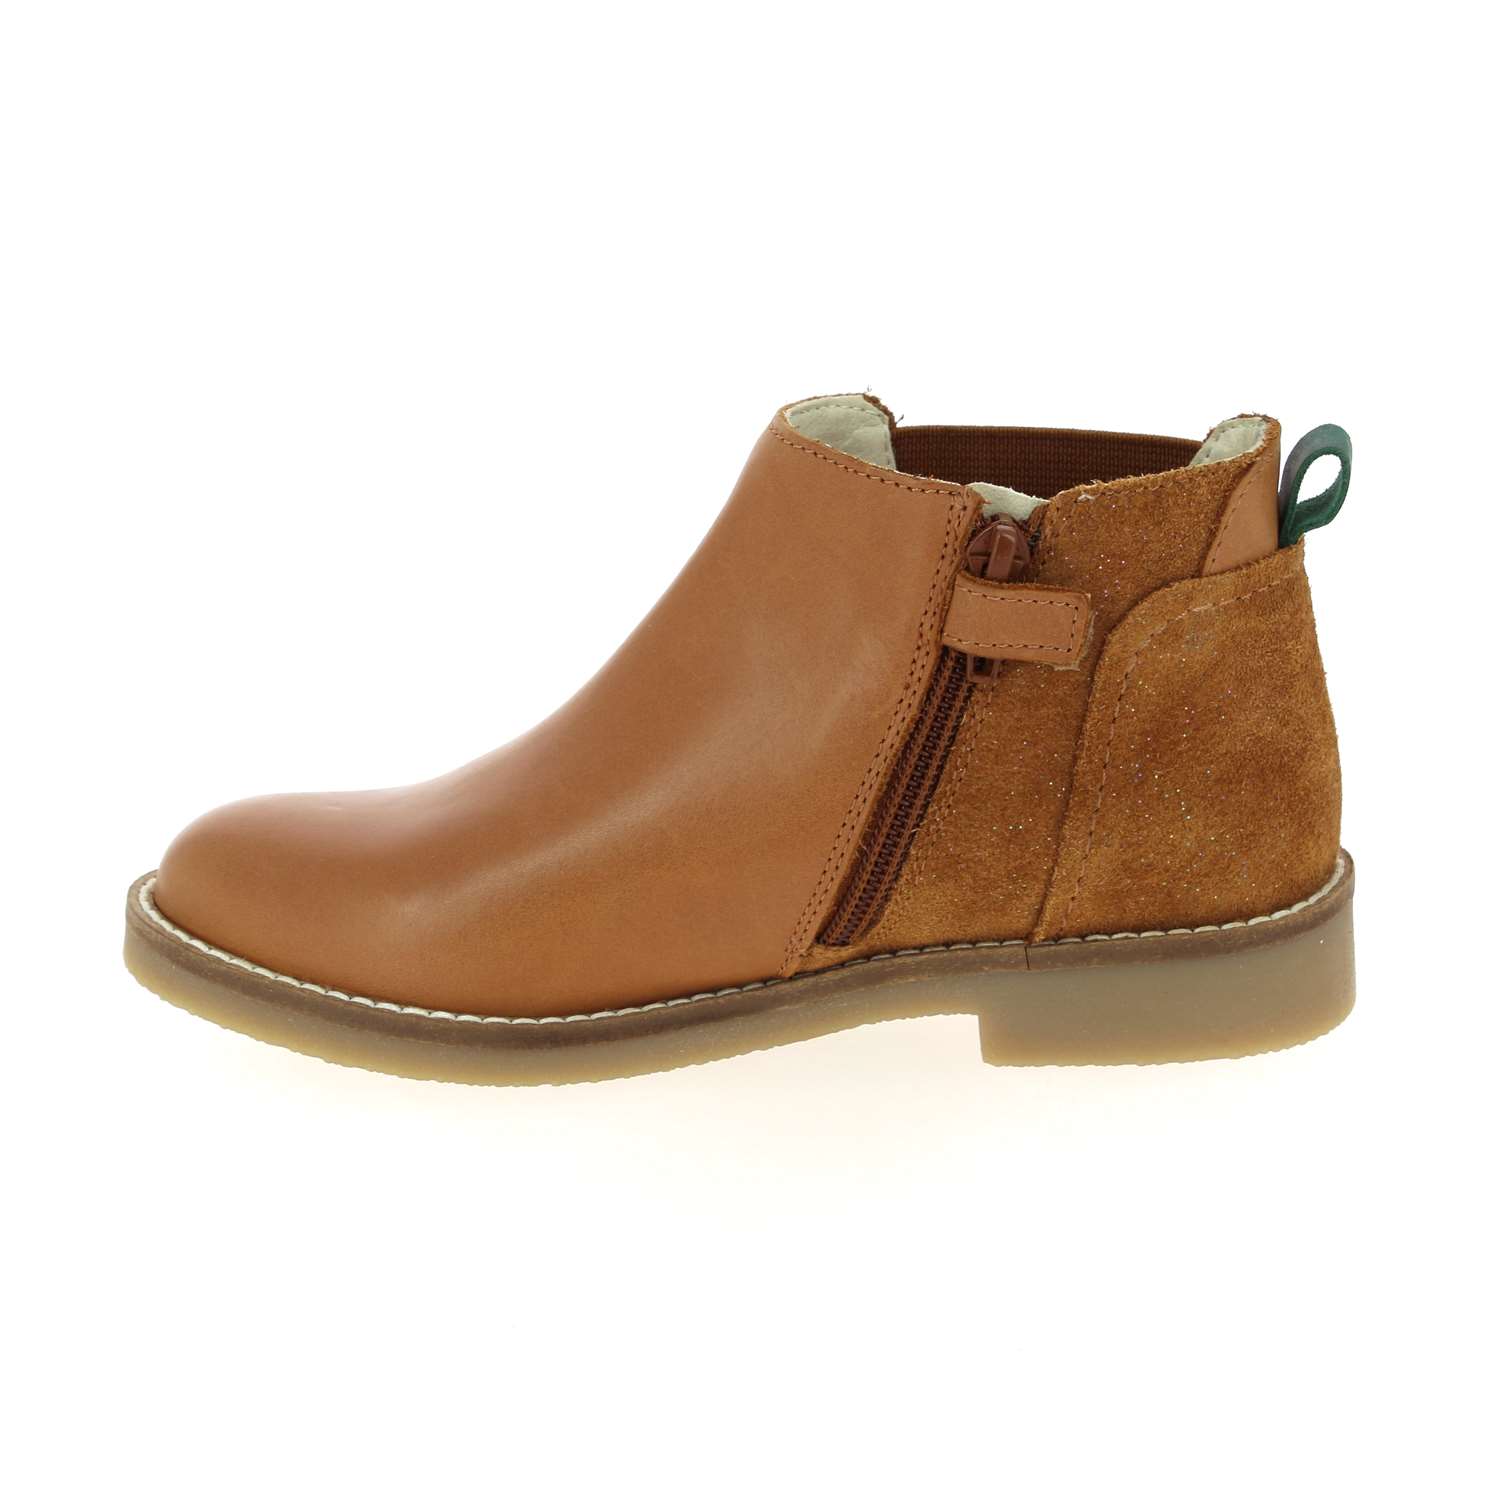 05 - NYCCO - KICKERS - Boots et bottines - Cuir